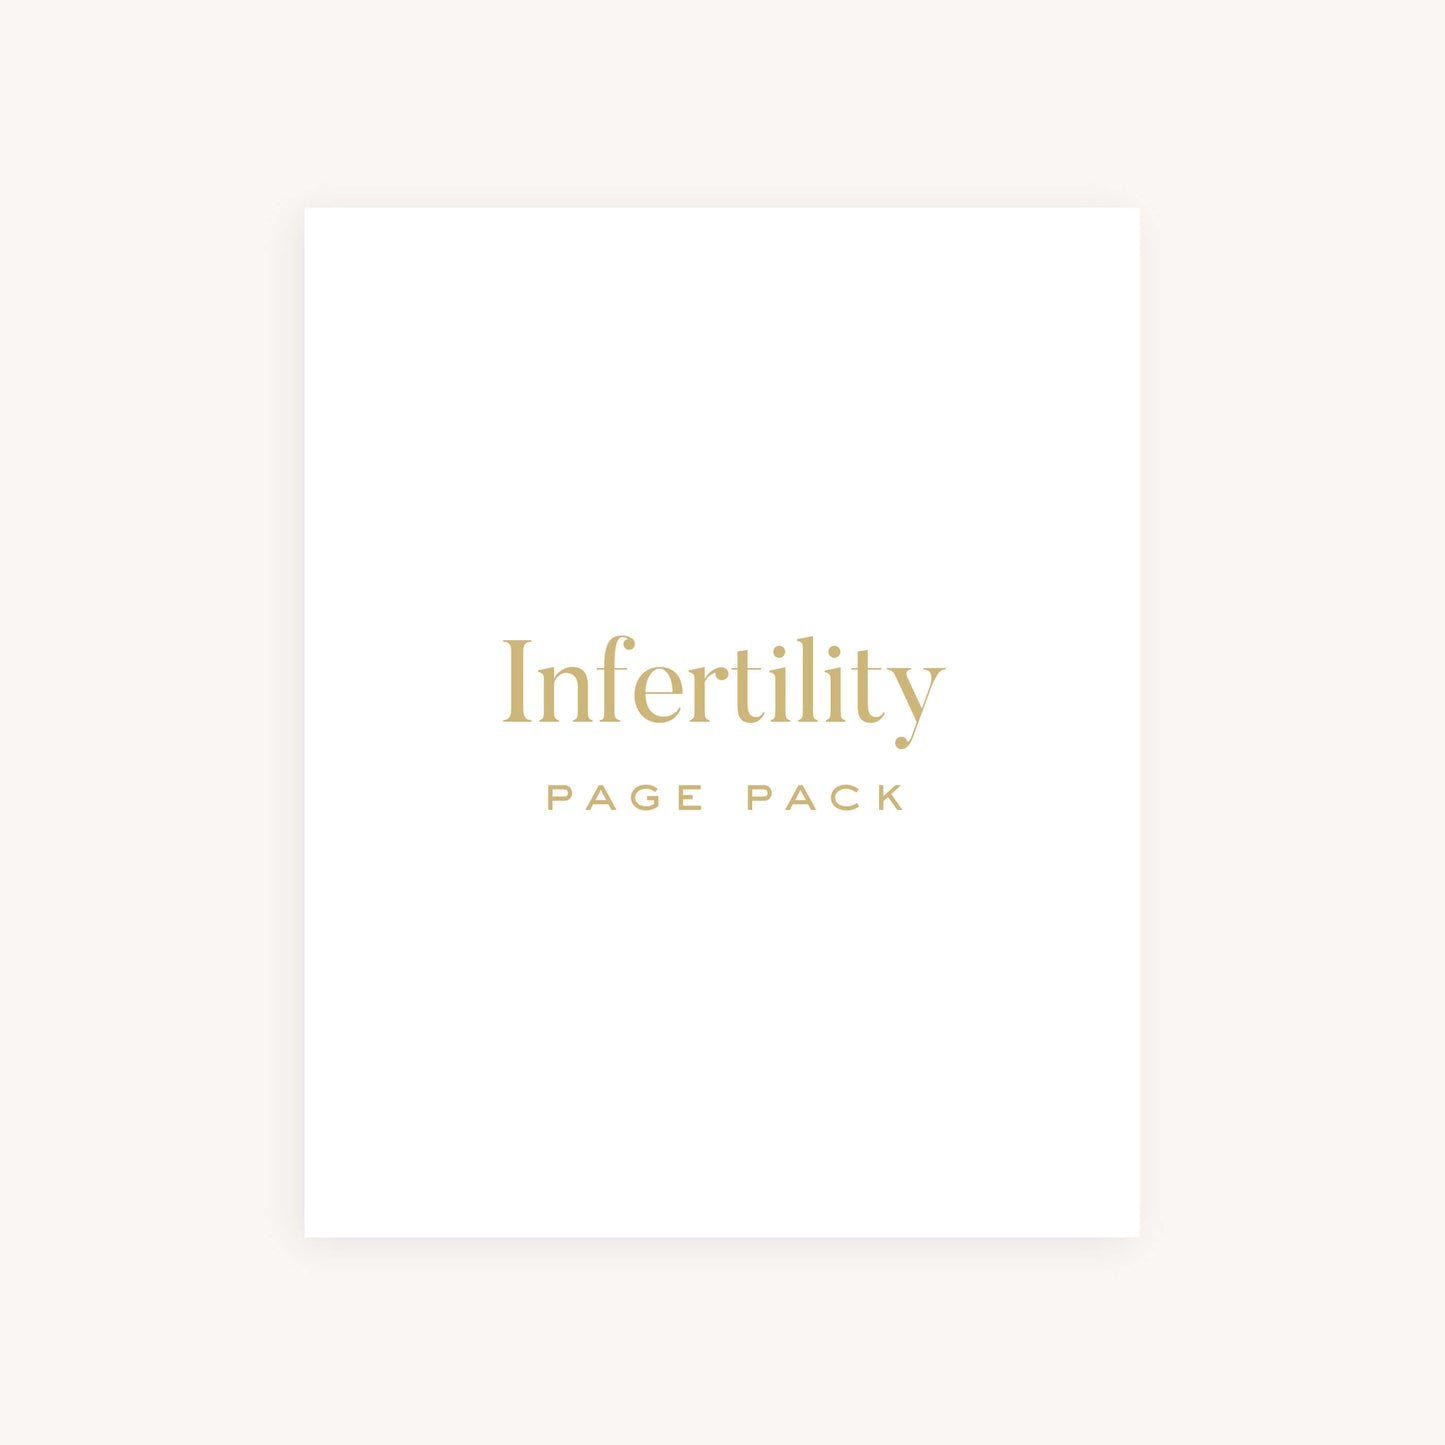 INFERTILITY BABY BOOK PAGE PACK